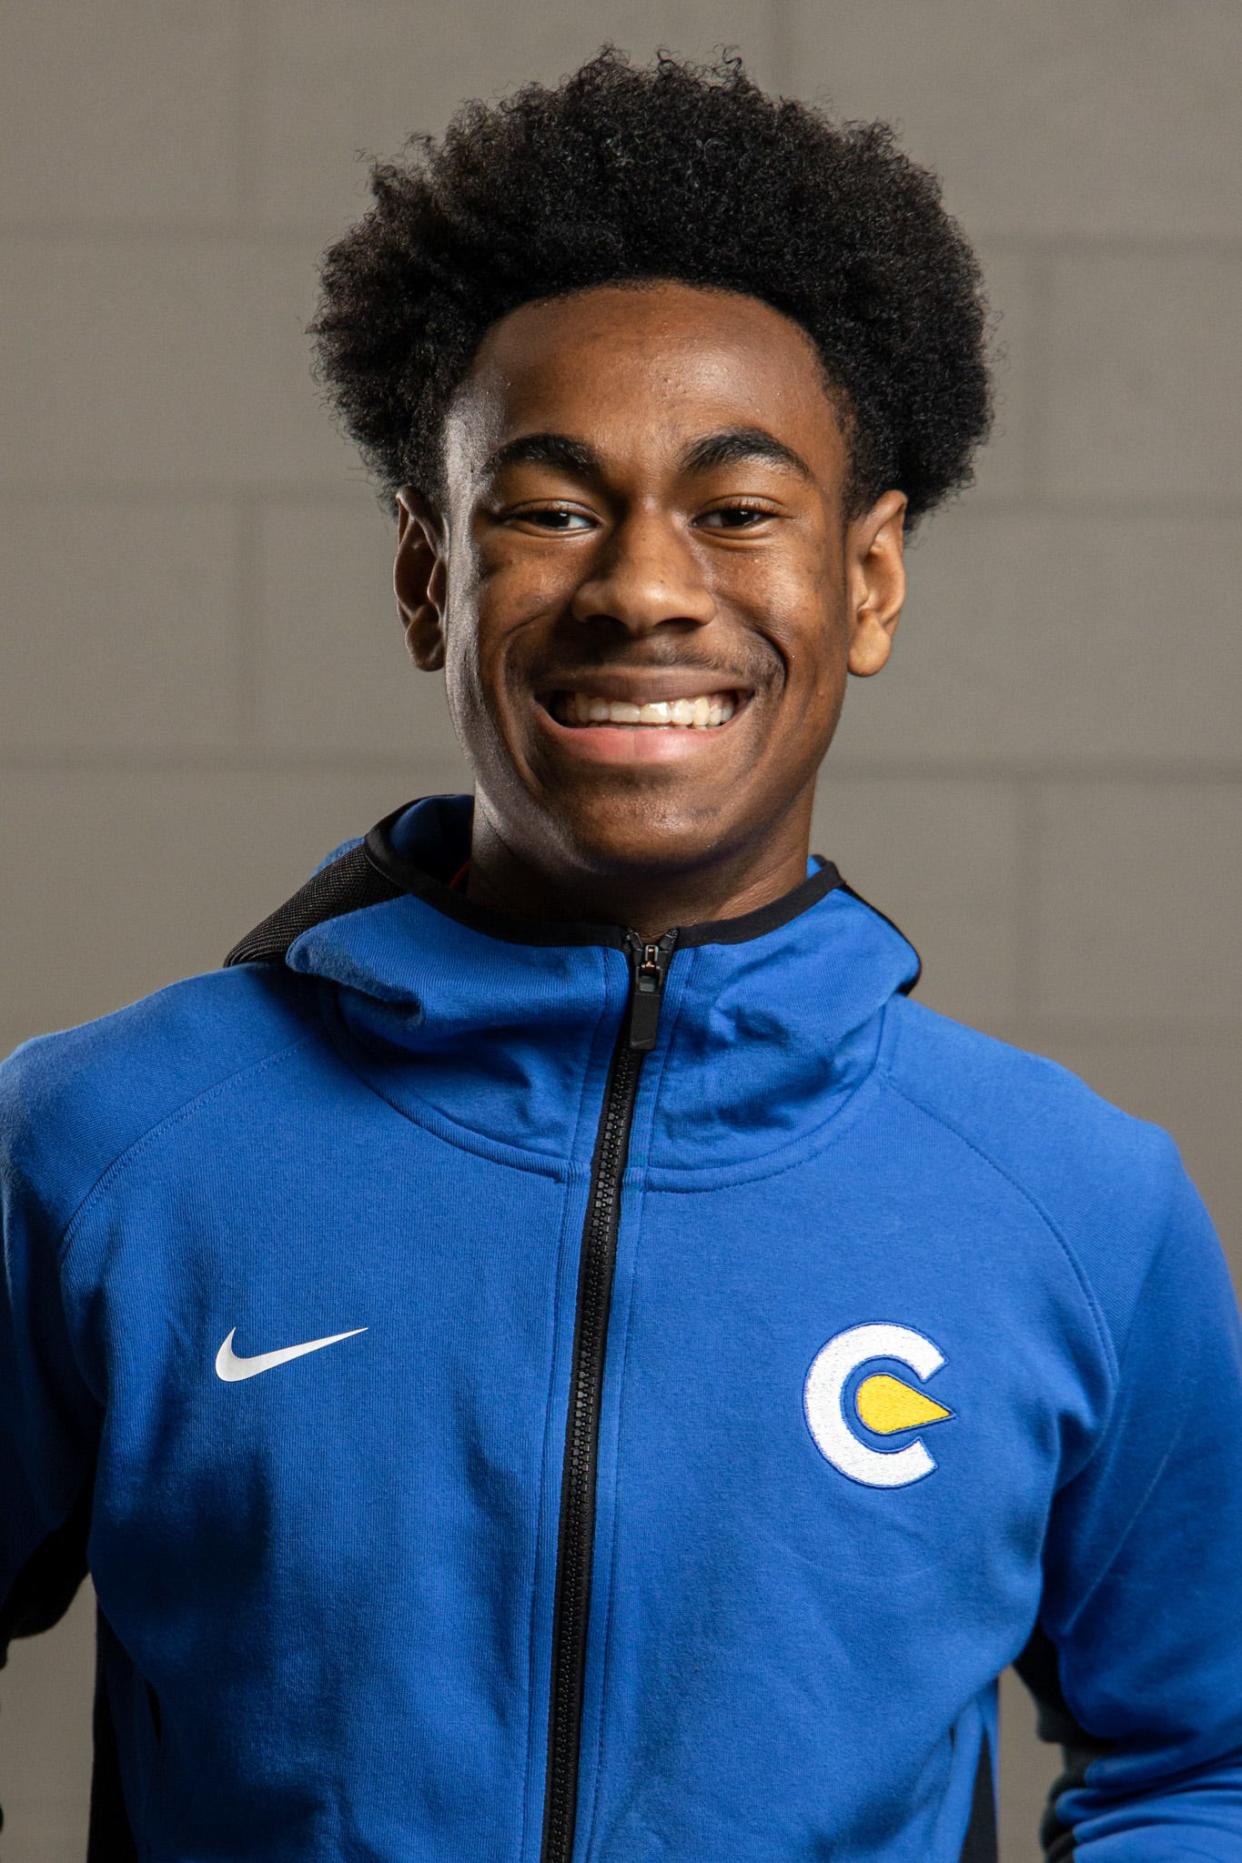 Xaiden Easter, Classen SAS boys soccer, is pictured at Media Day in Oklahoma City on Wednesday, Feb. 8, 2023.